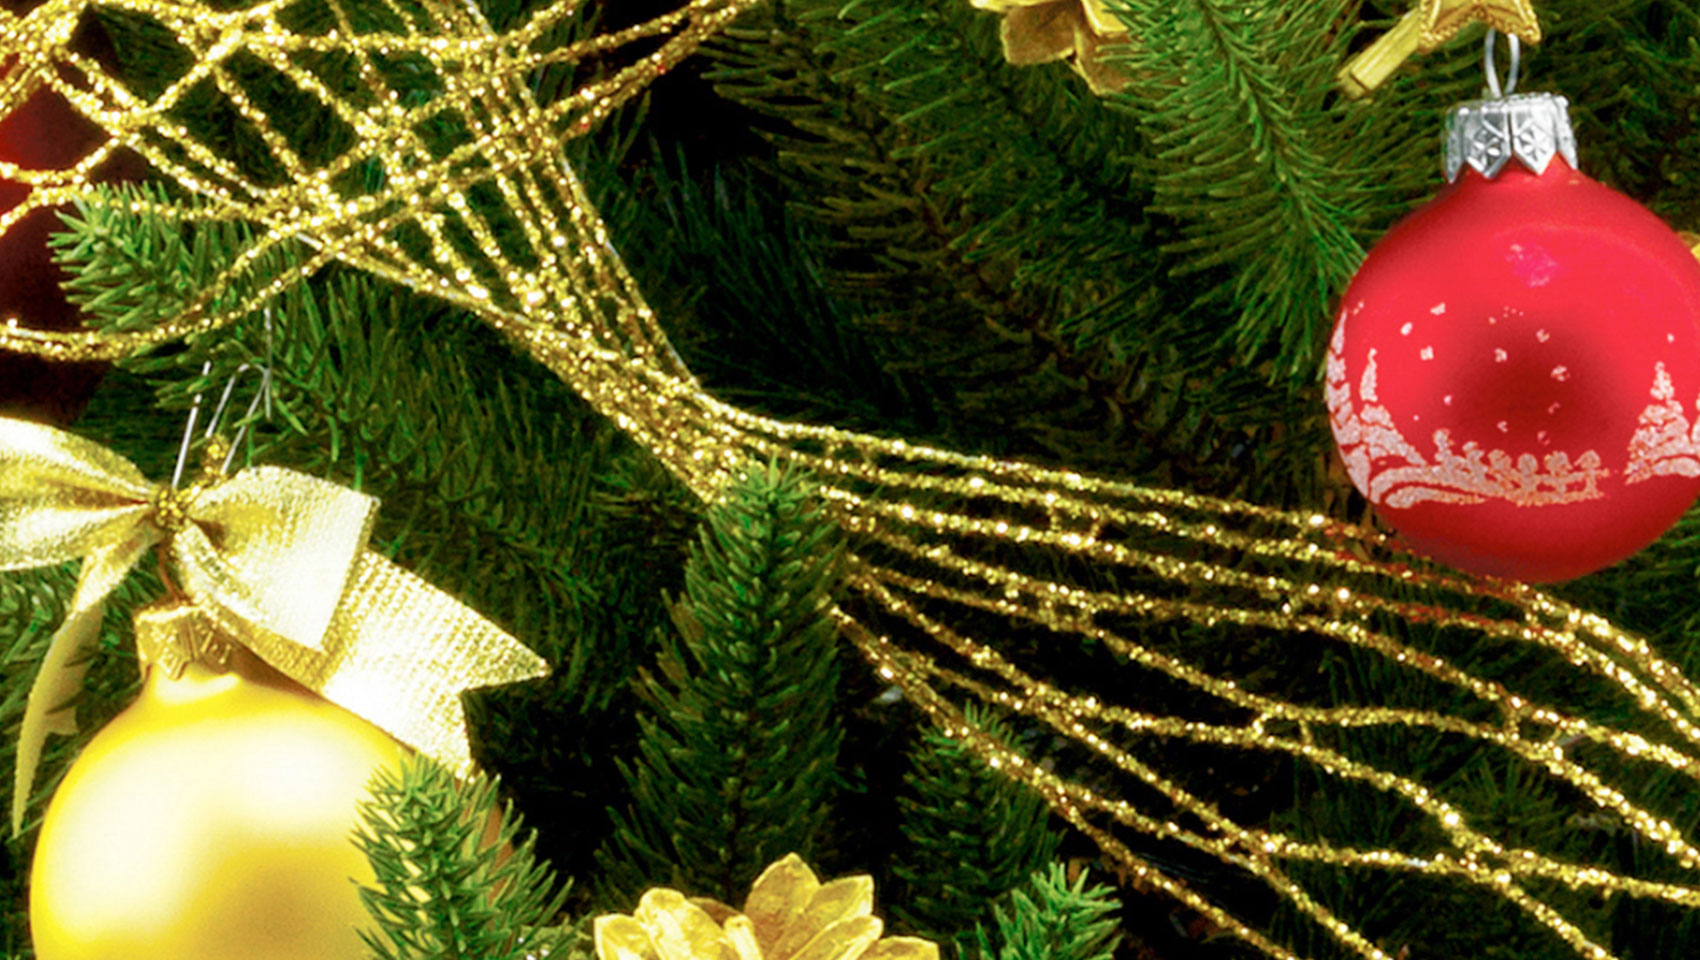 Red and Gold holiday decorations on greenery